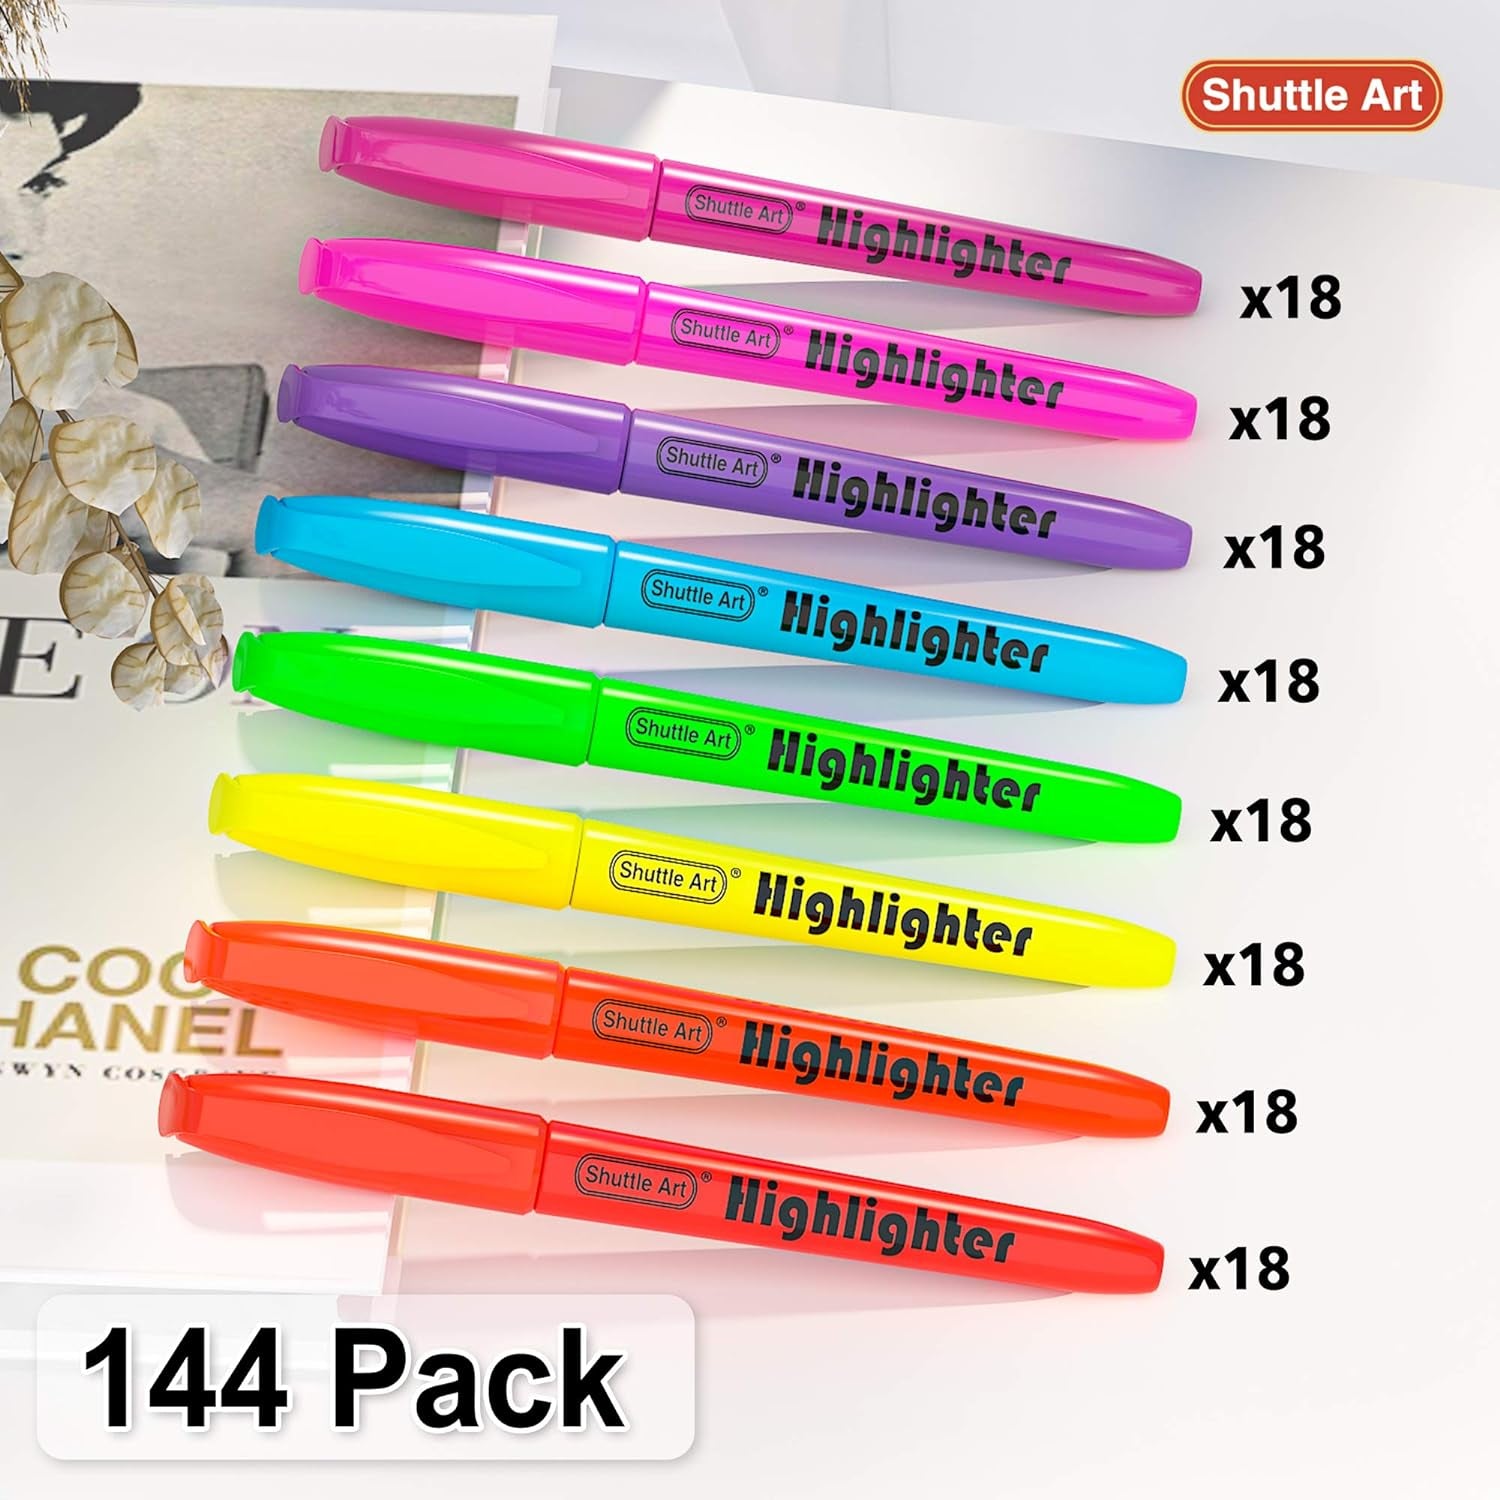 144 Pack Highlighters, Highlighters Assorted Colors Set, 8 Bright Colors Chisel Tip Highlighter Markers Bulk for Kid and Adult Coloring, Highlighting as School Supplies